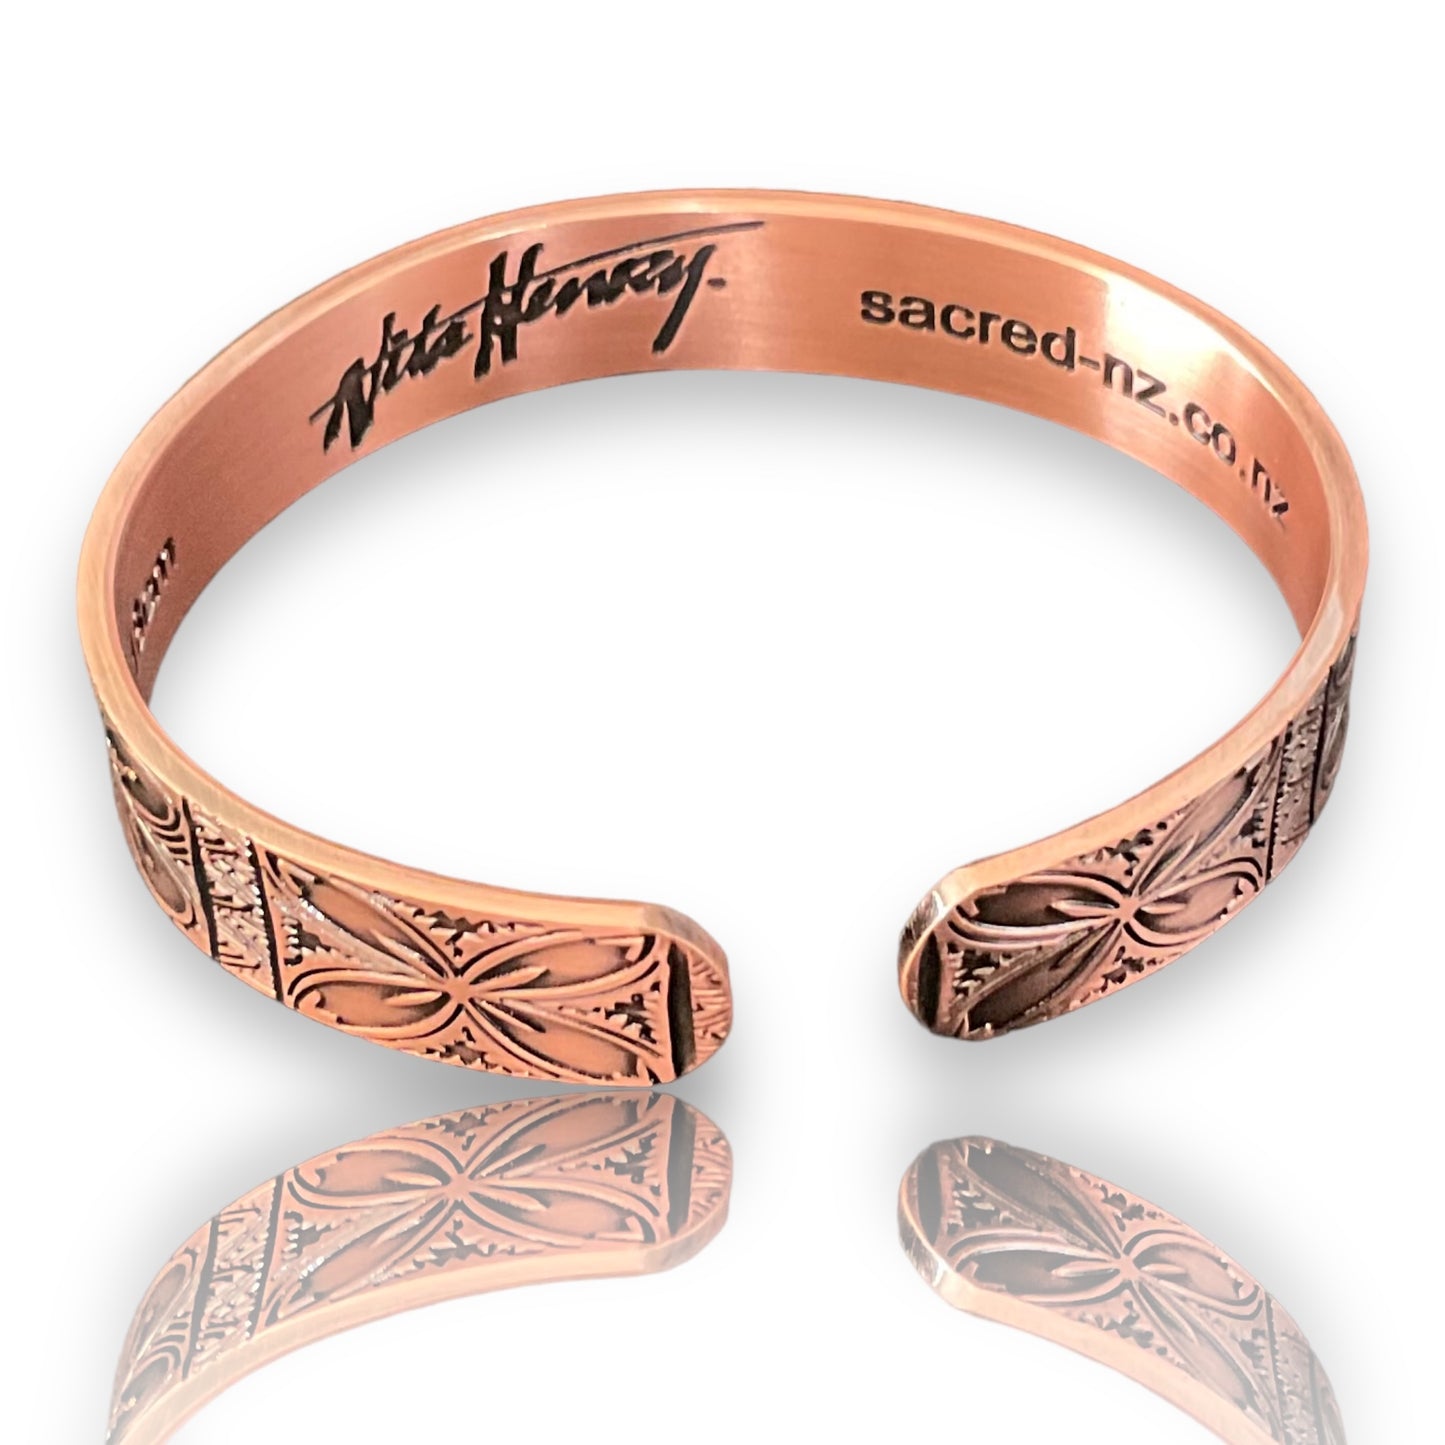 A3 100% Pure Copper Magnetic Band 'Pacifica Tapa’